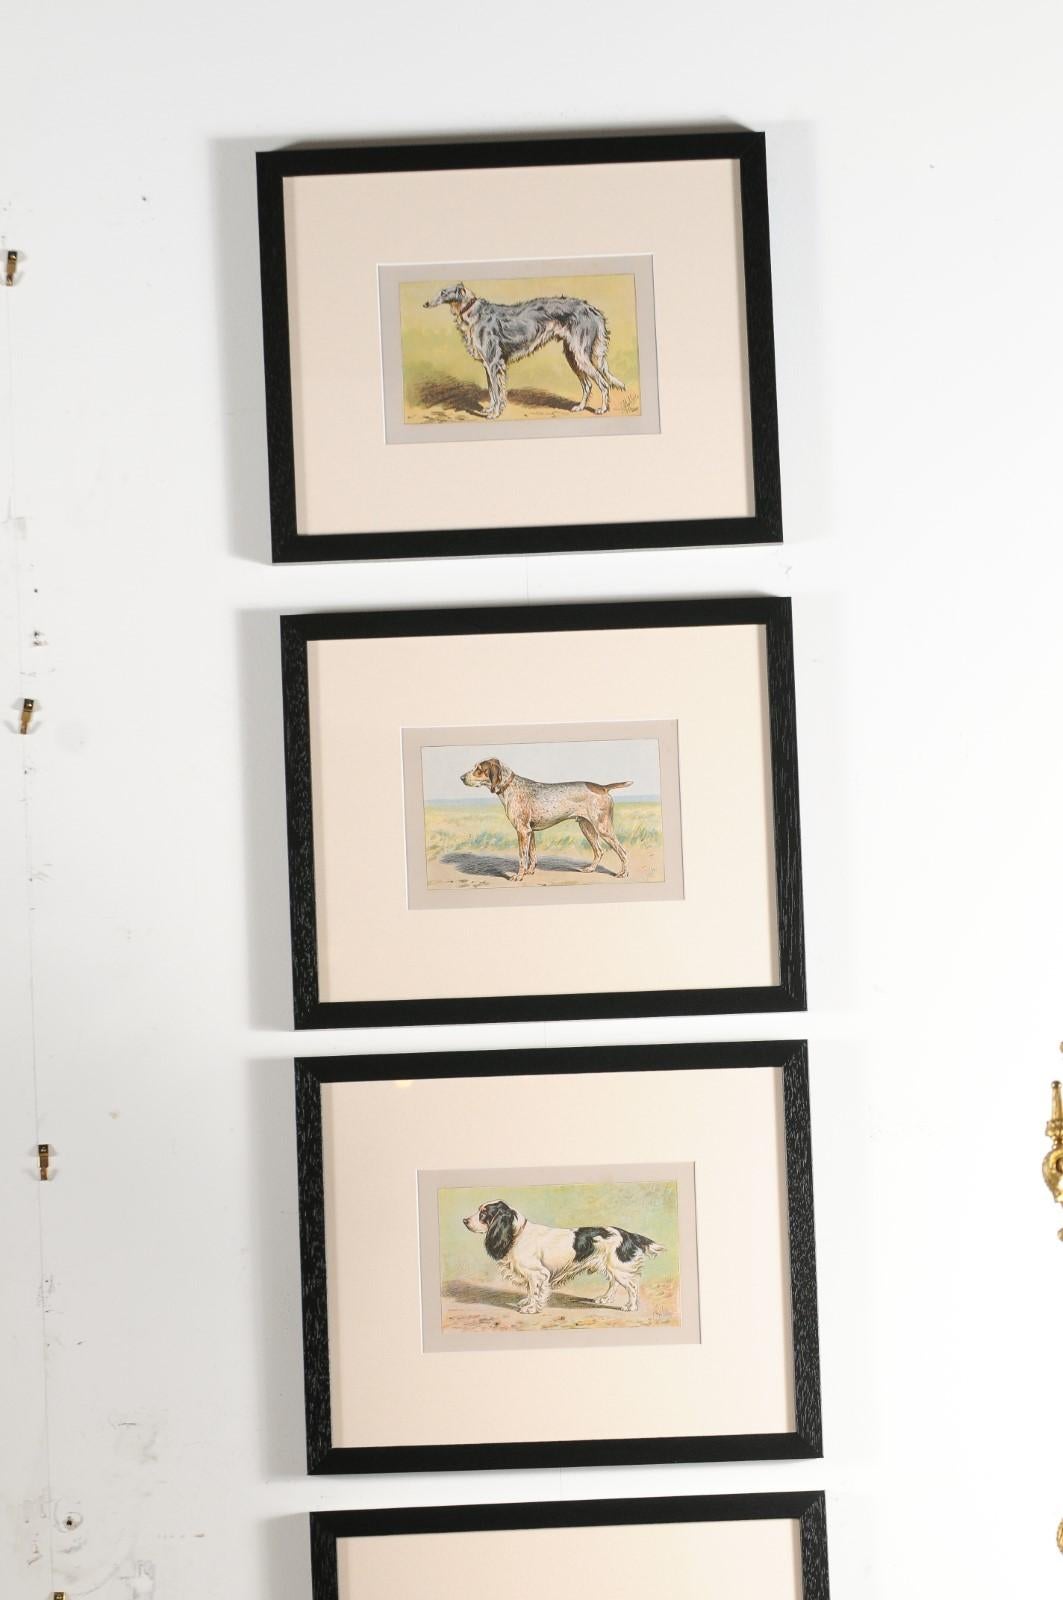 P. Mahler Custom Framed Lithographs Depicting Hunting Dogs in Outdoor Scenes 3